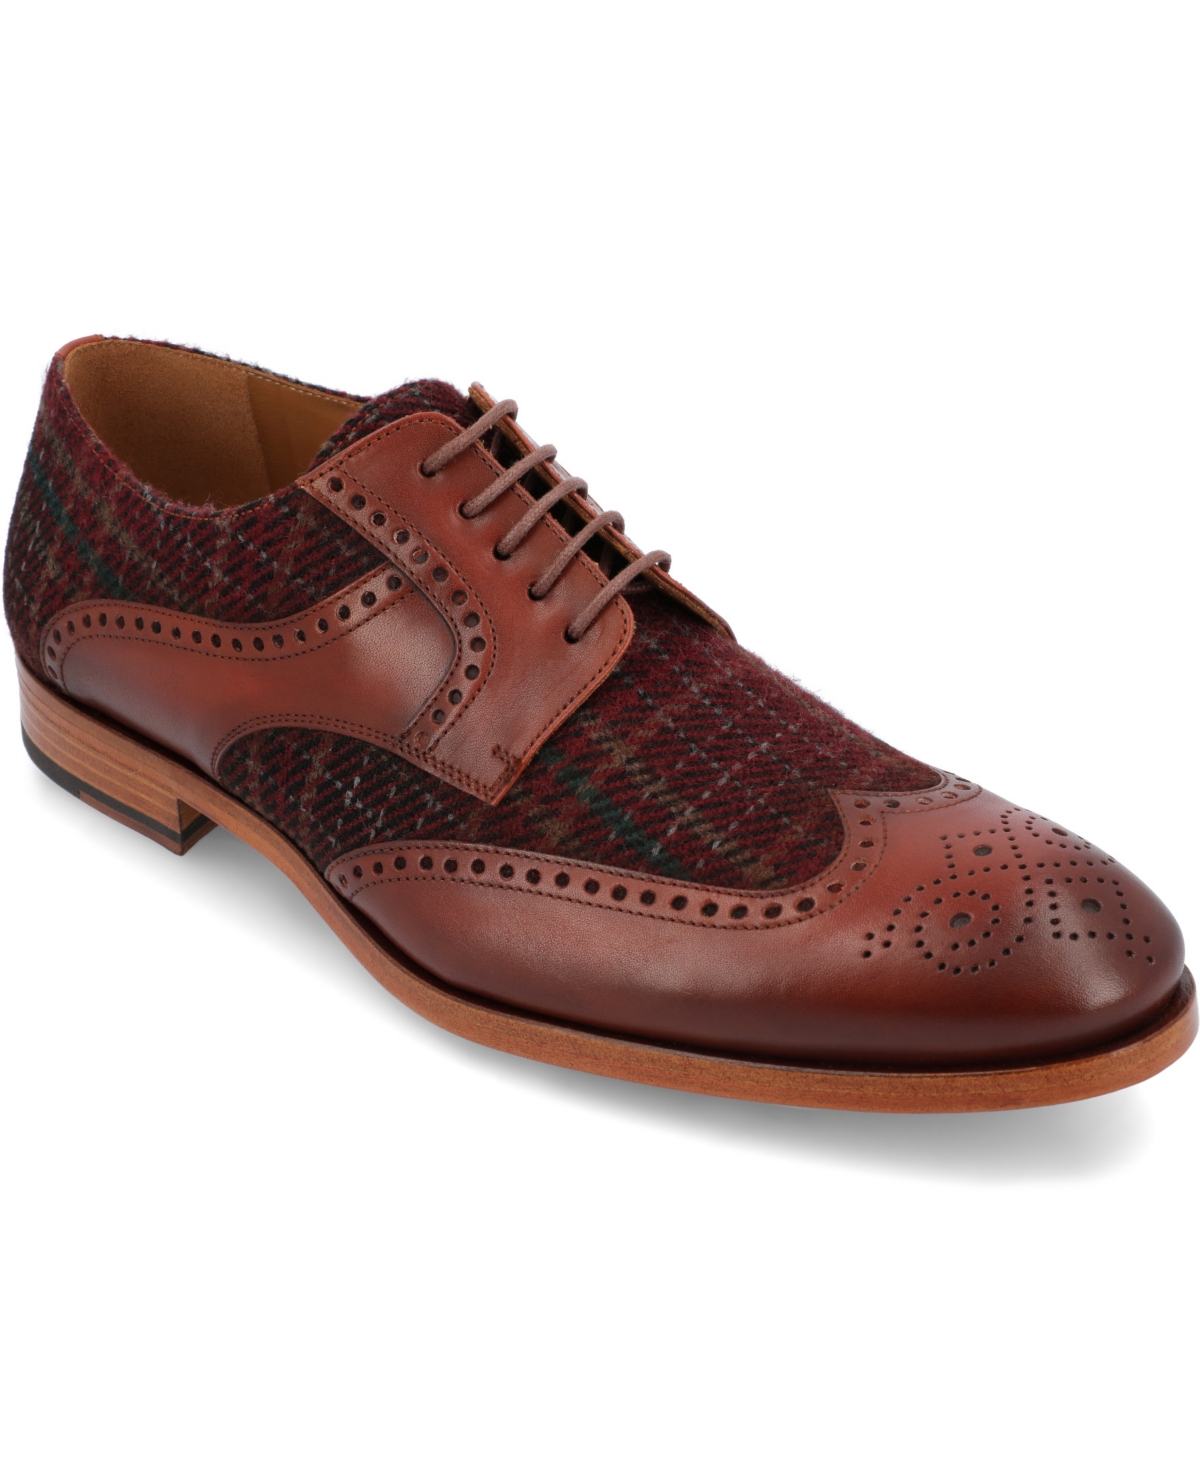 Men's Wallace Handcrafted Leather and Wool Brogue Wingtip Oxford Lace-up Dress Shoe - Red Plaid